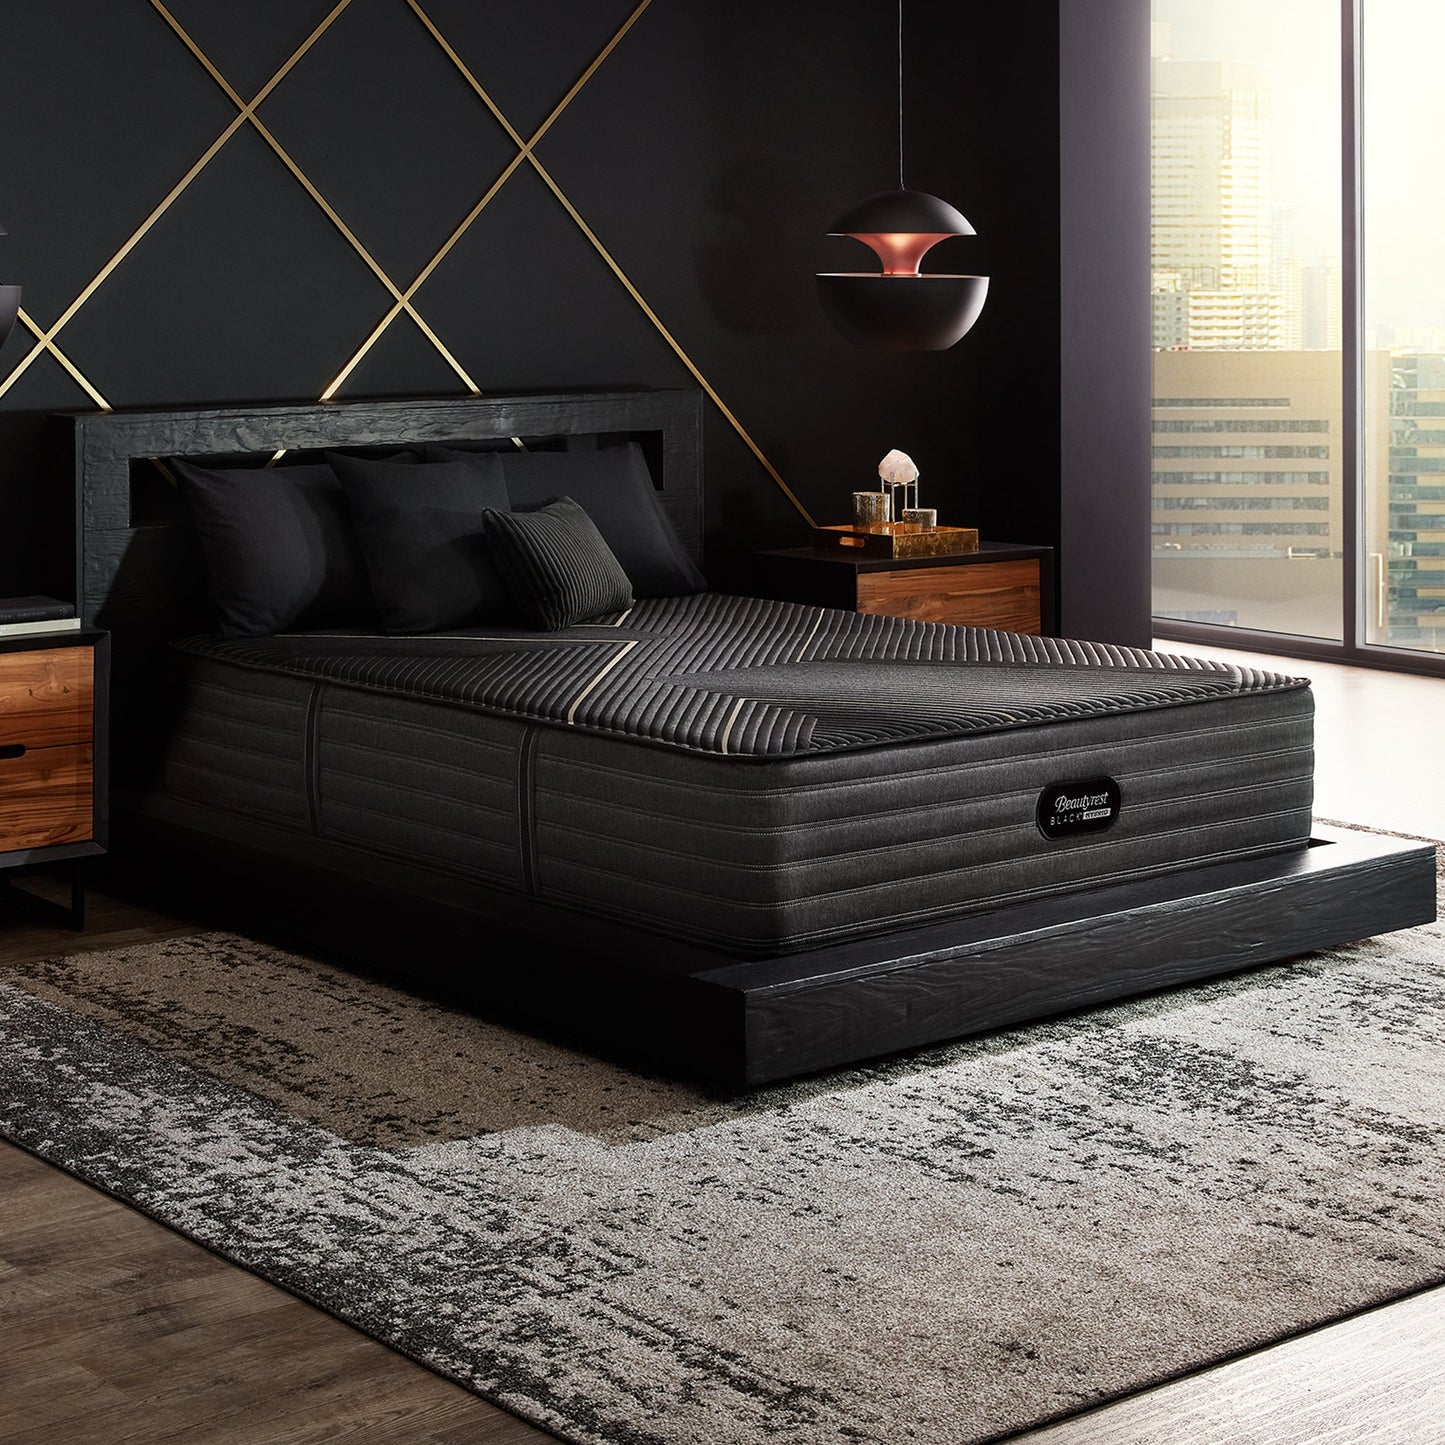 Beautyrest Black Hybrid K-Class Firm Mattress On Bed Frame In Bedroom Angle View